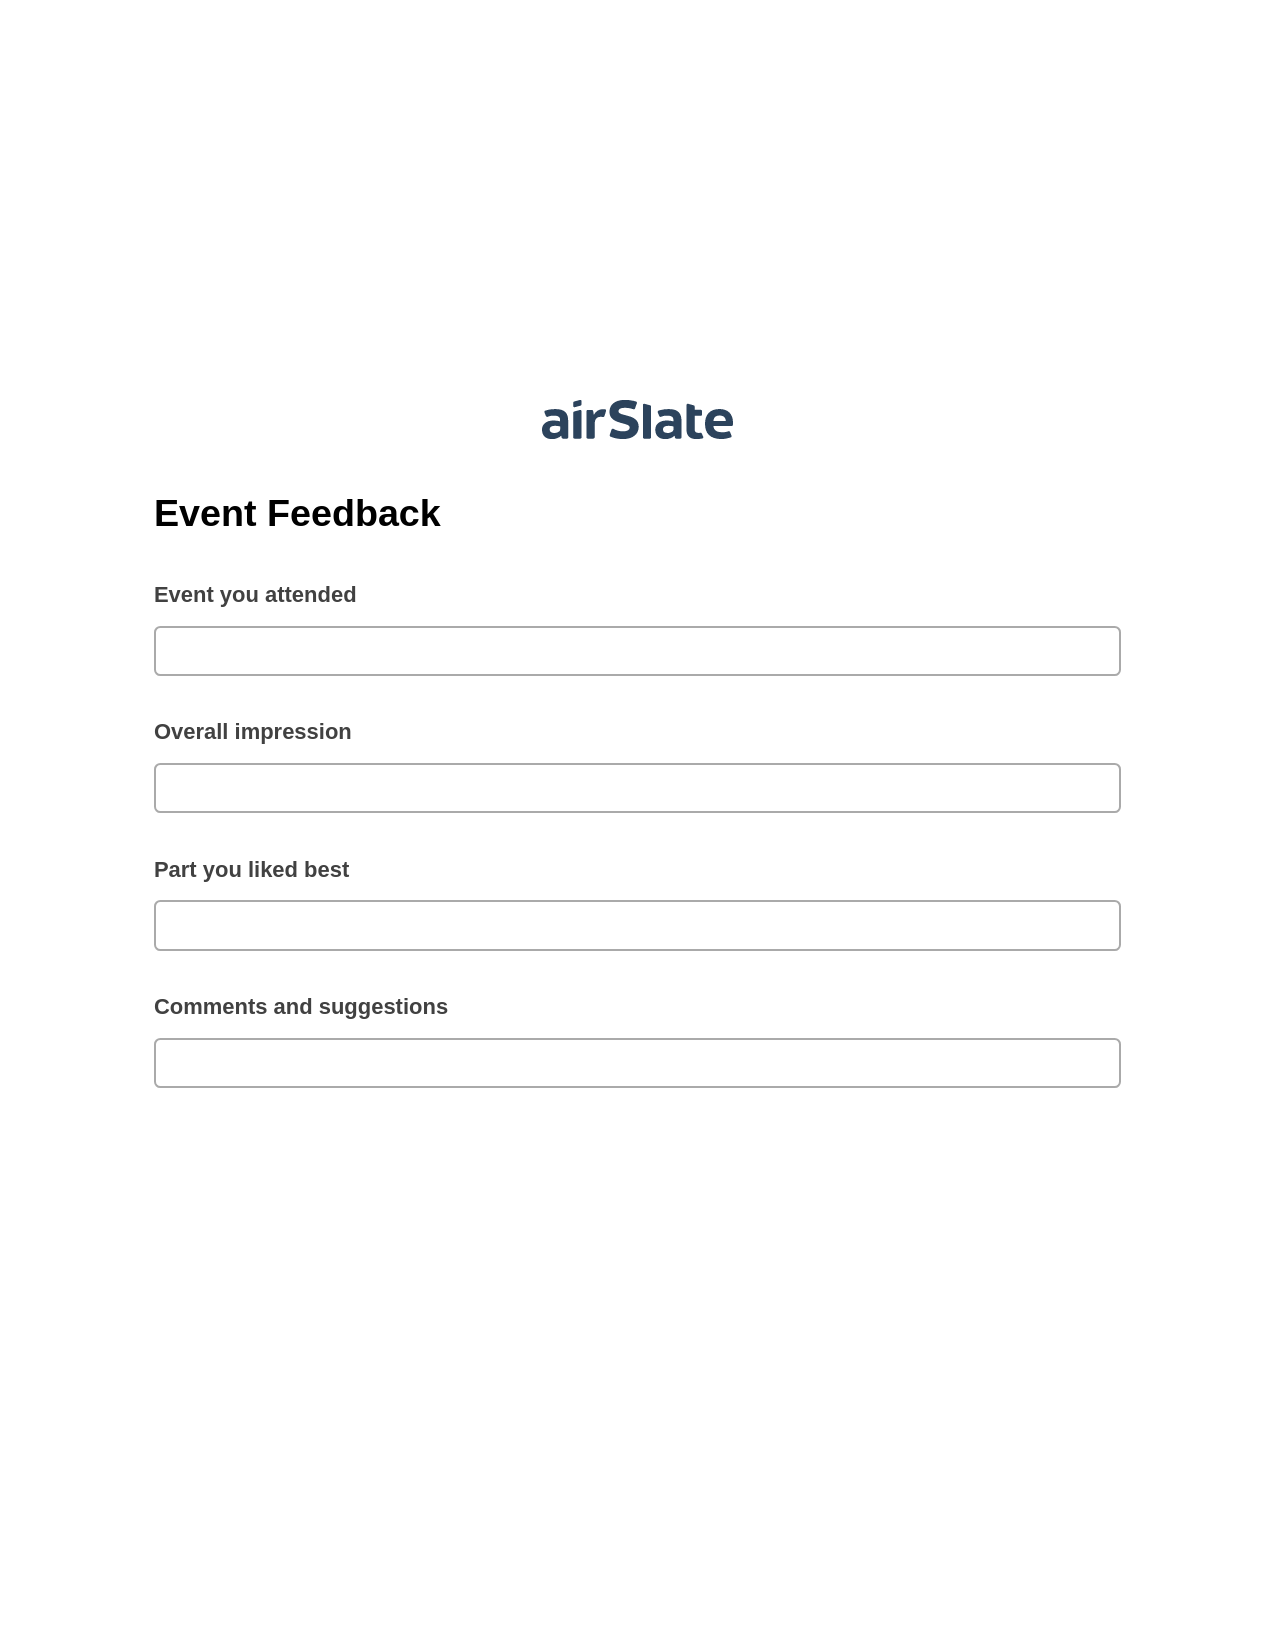 Event Feedback Pre-fill from NetSuite Records Bot, SendGrid send Campaign bot, OneDrive Bot